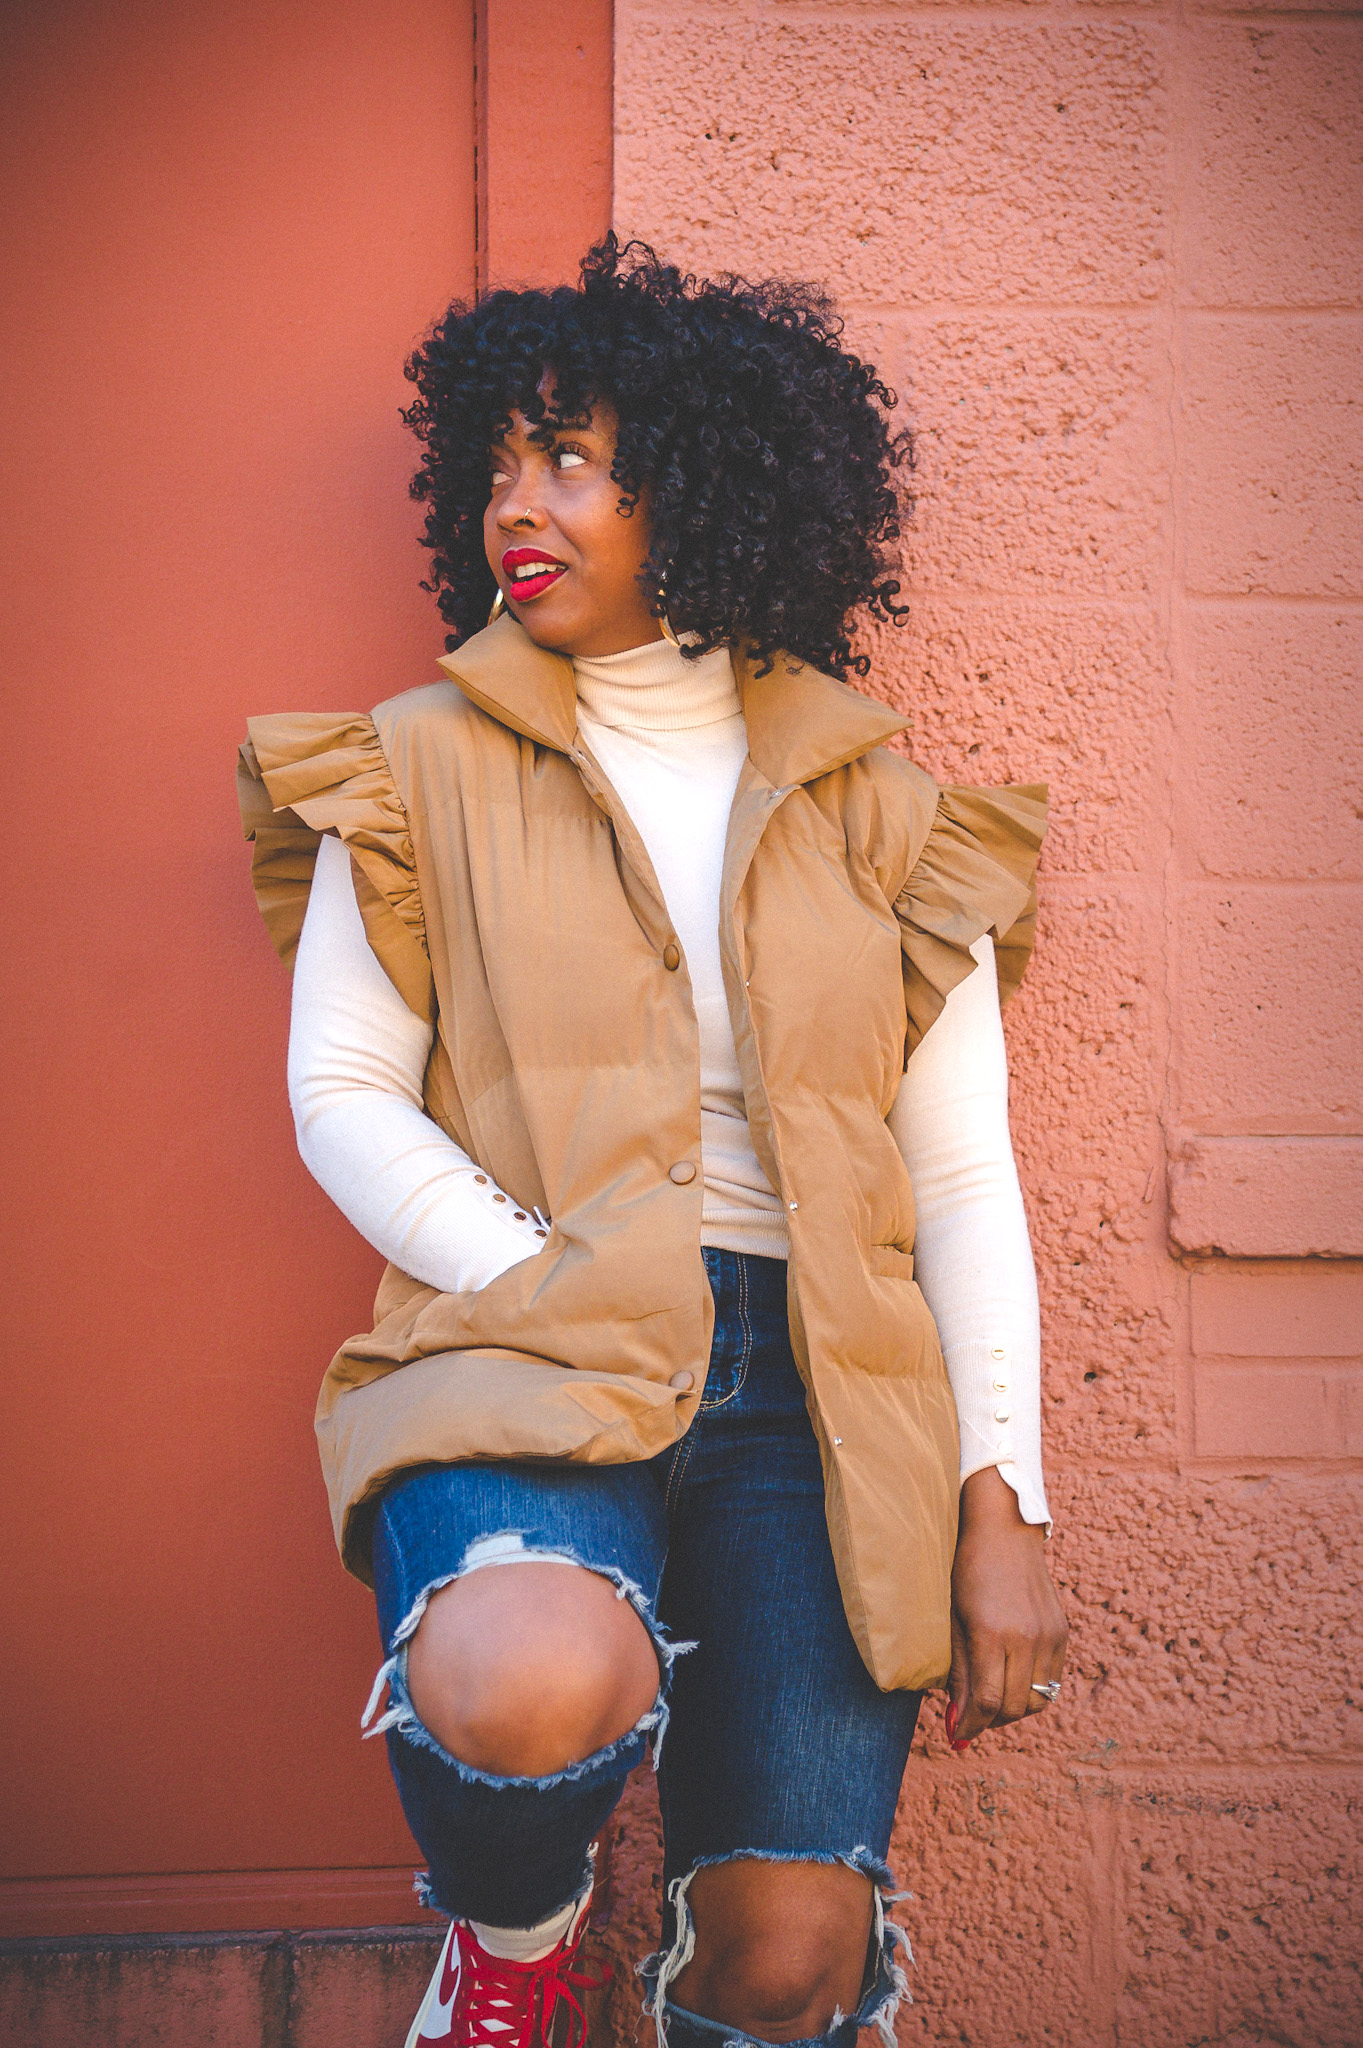 SWEENEE STYLE, HOW TO DRESS FOR WINTER, HOLIDAY 2022 OUTFIT IDEAS, EASY OUTFIT IDEAS, RECREATE OUTFITS, BLACK GIRLS WHO WEAR JORDANS, HOW TO STYLE NATURAL HAIR, INDIANAPOLIS FASHION BLOG, INDIANA STYLE BLOG